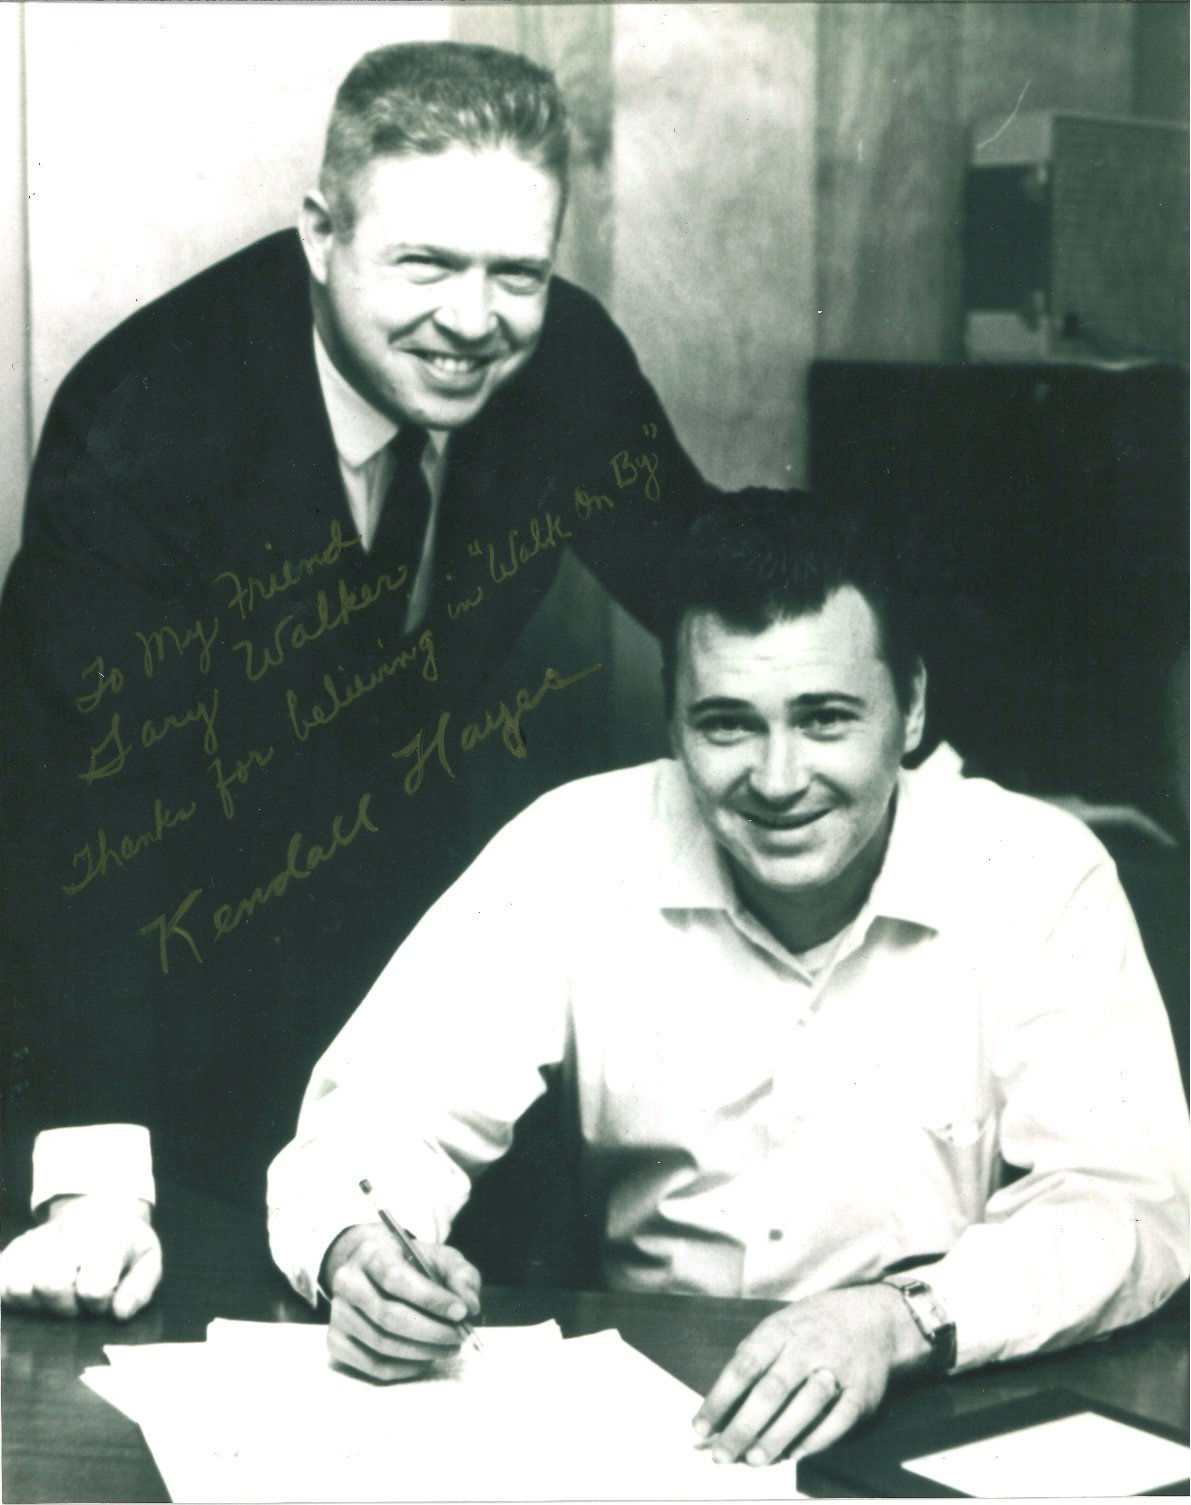 Gary Walker with Kendall Hayes, writer of the chart smash "Walk On By", recorded by Leroy Van Dyke. Gary contributed the second verse of the song.